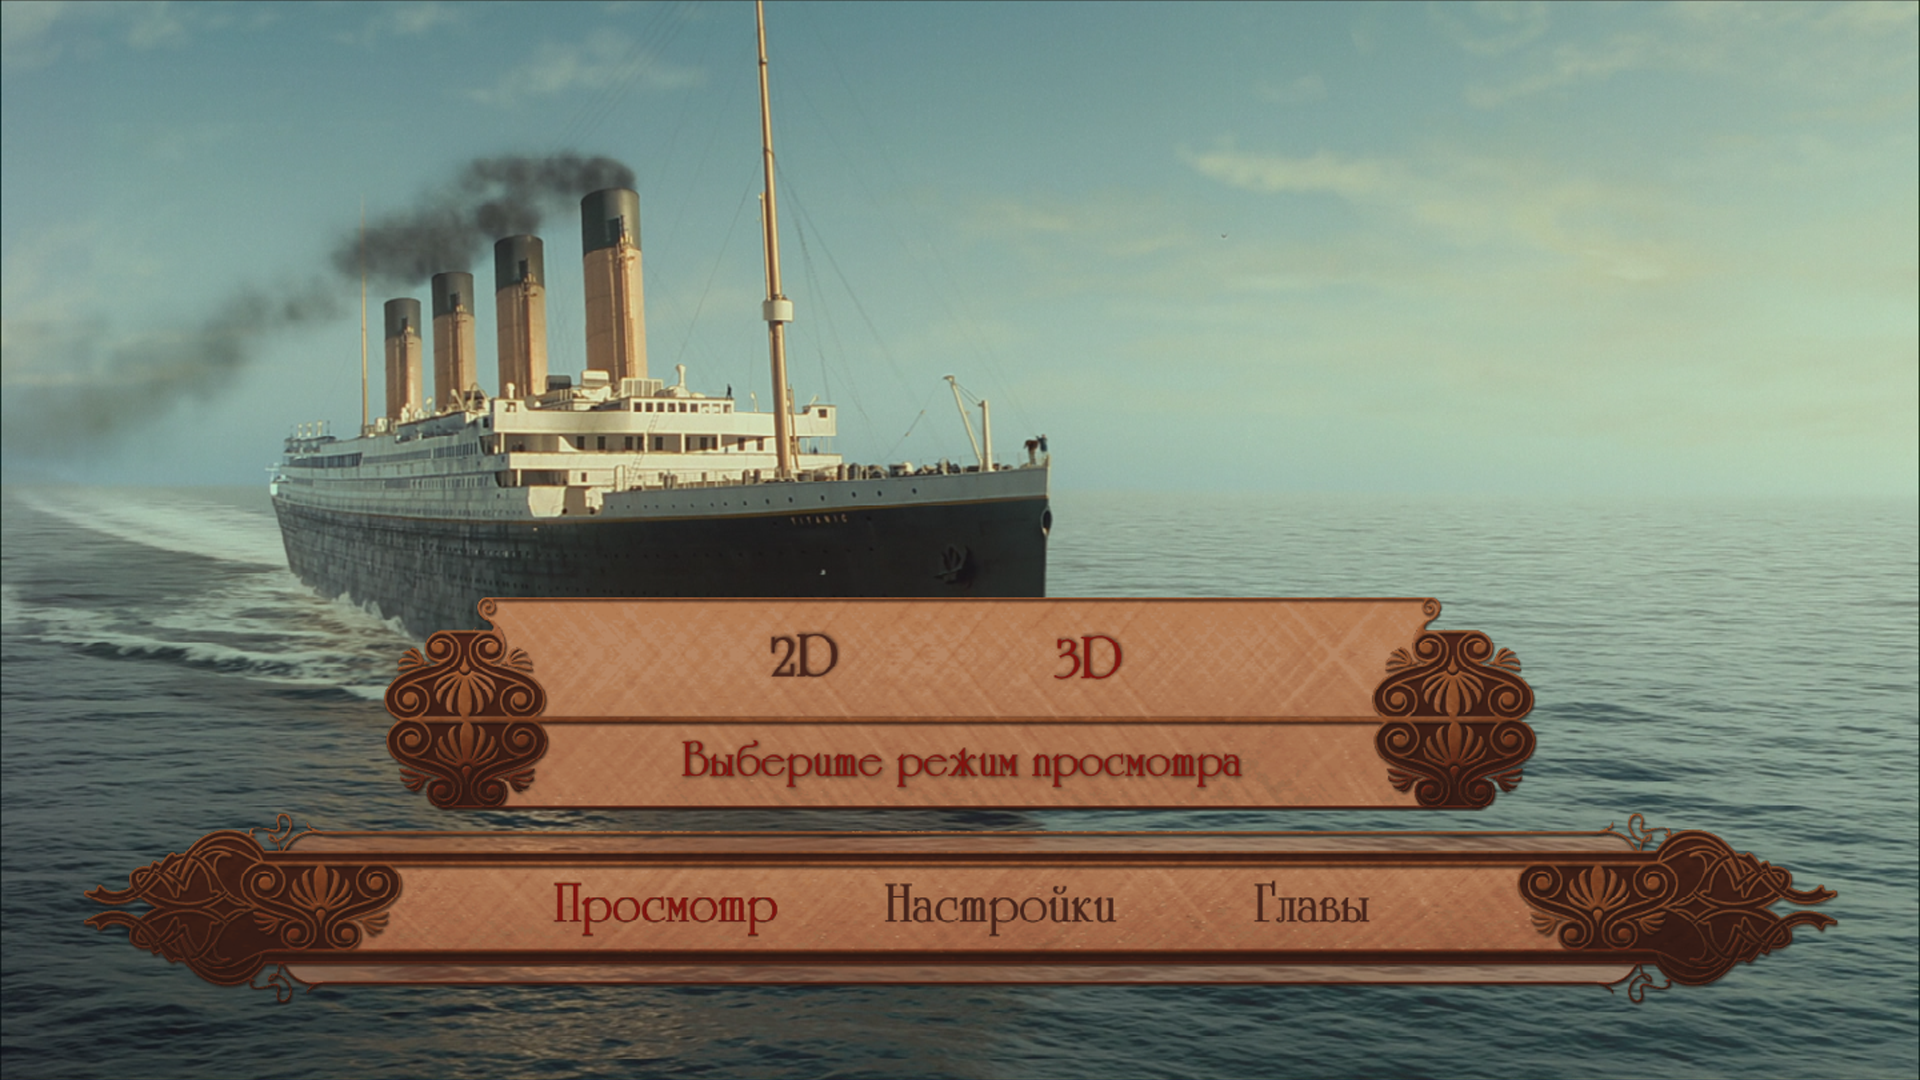 titanic full movie 3d version of a triangle.